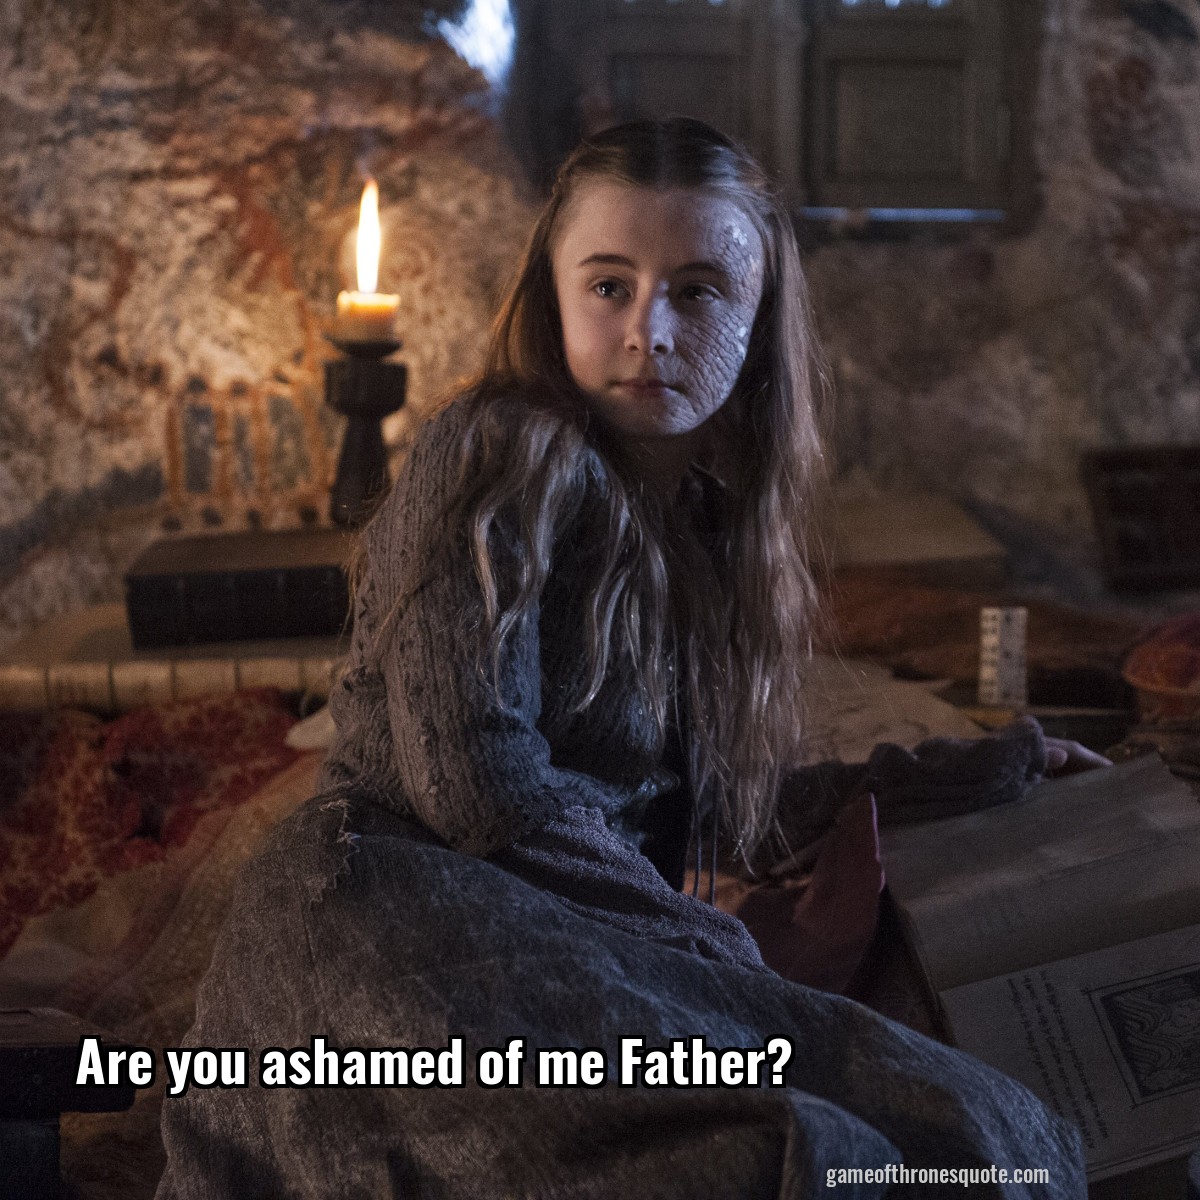 Are you ashamed of me Father?